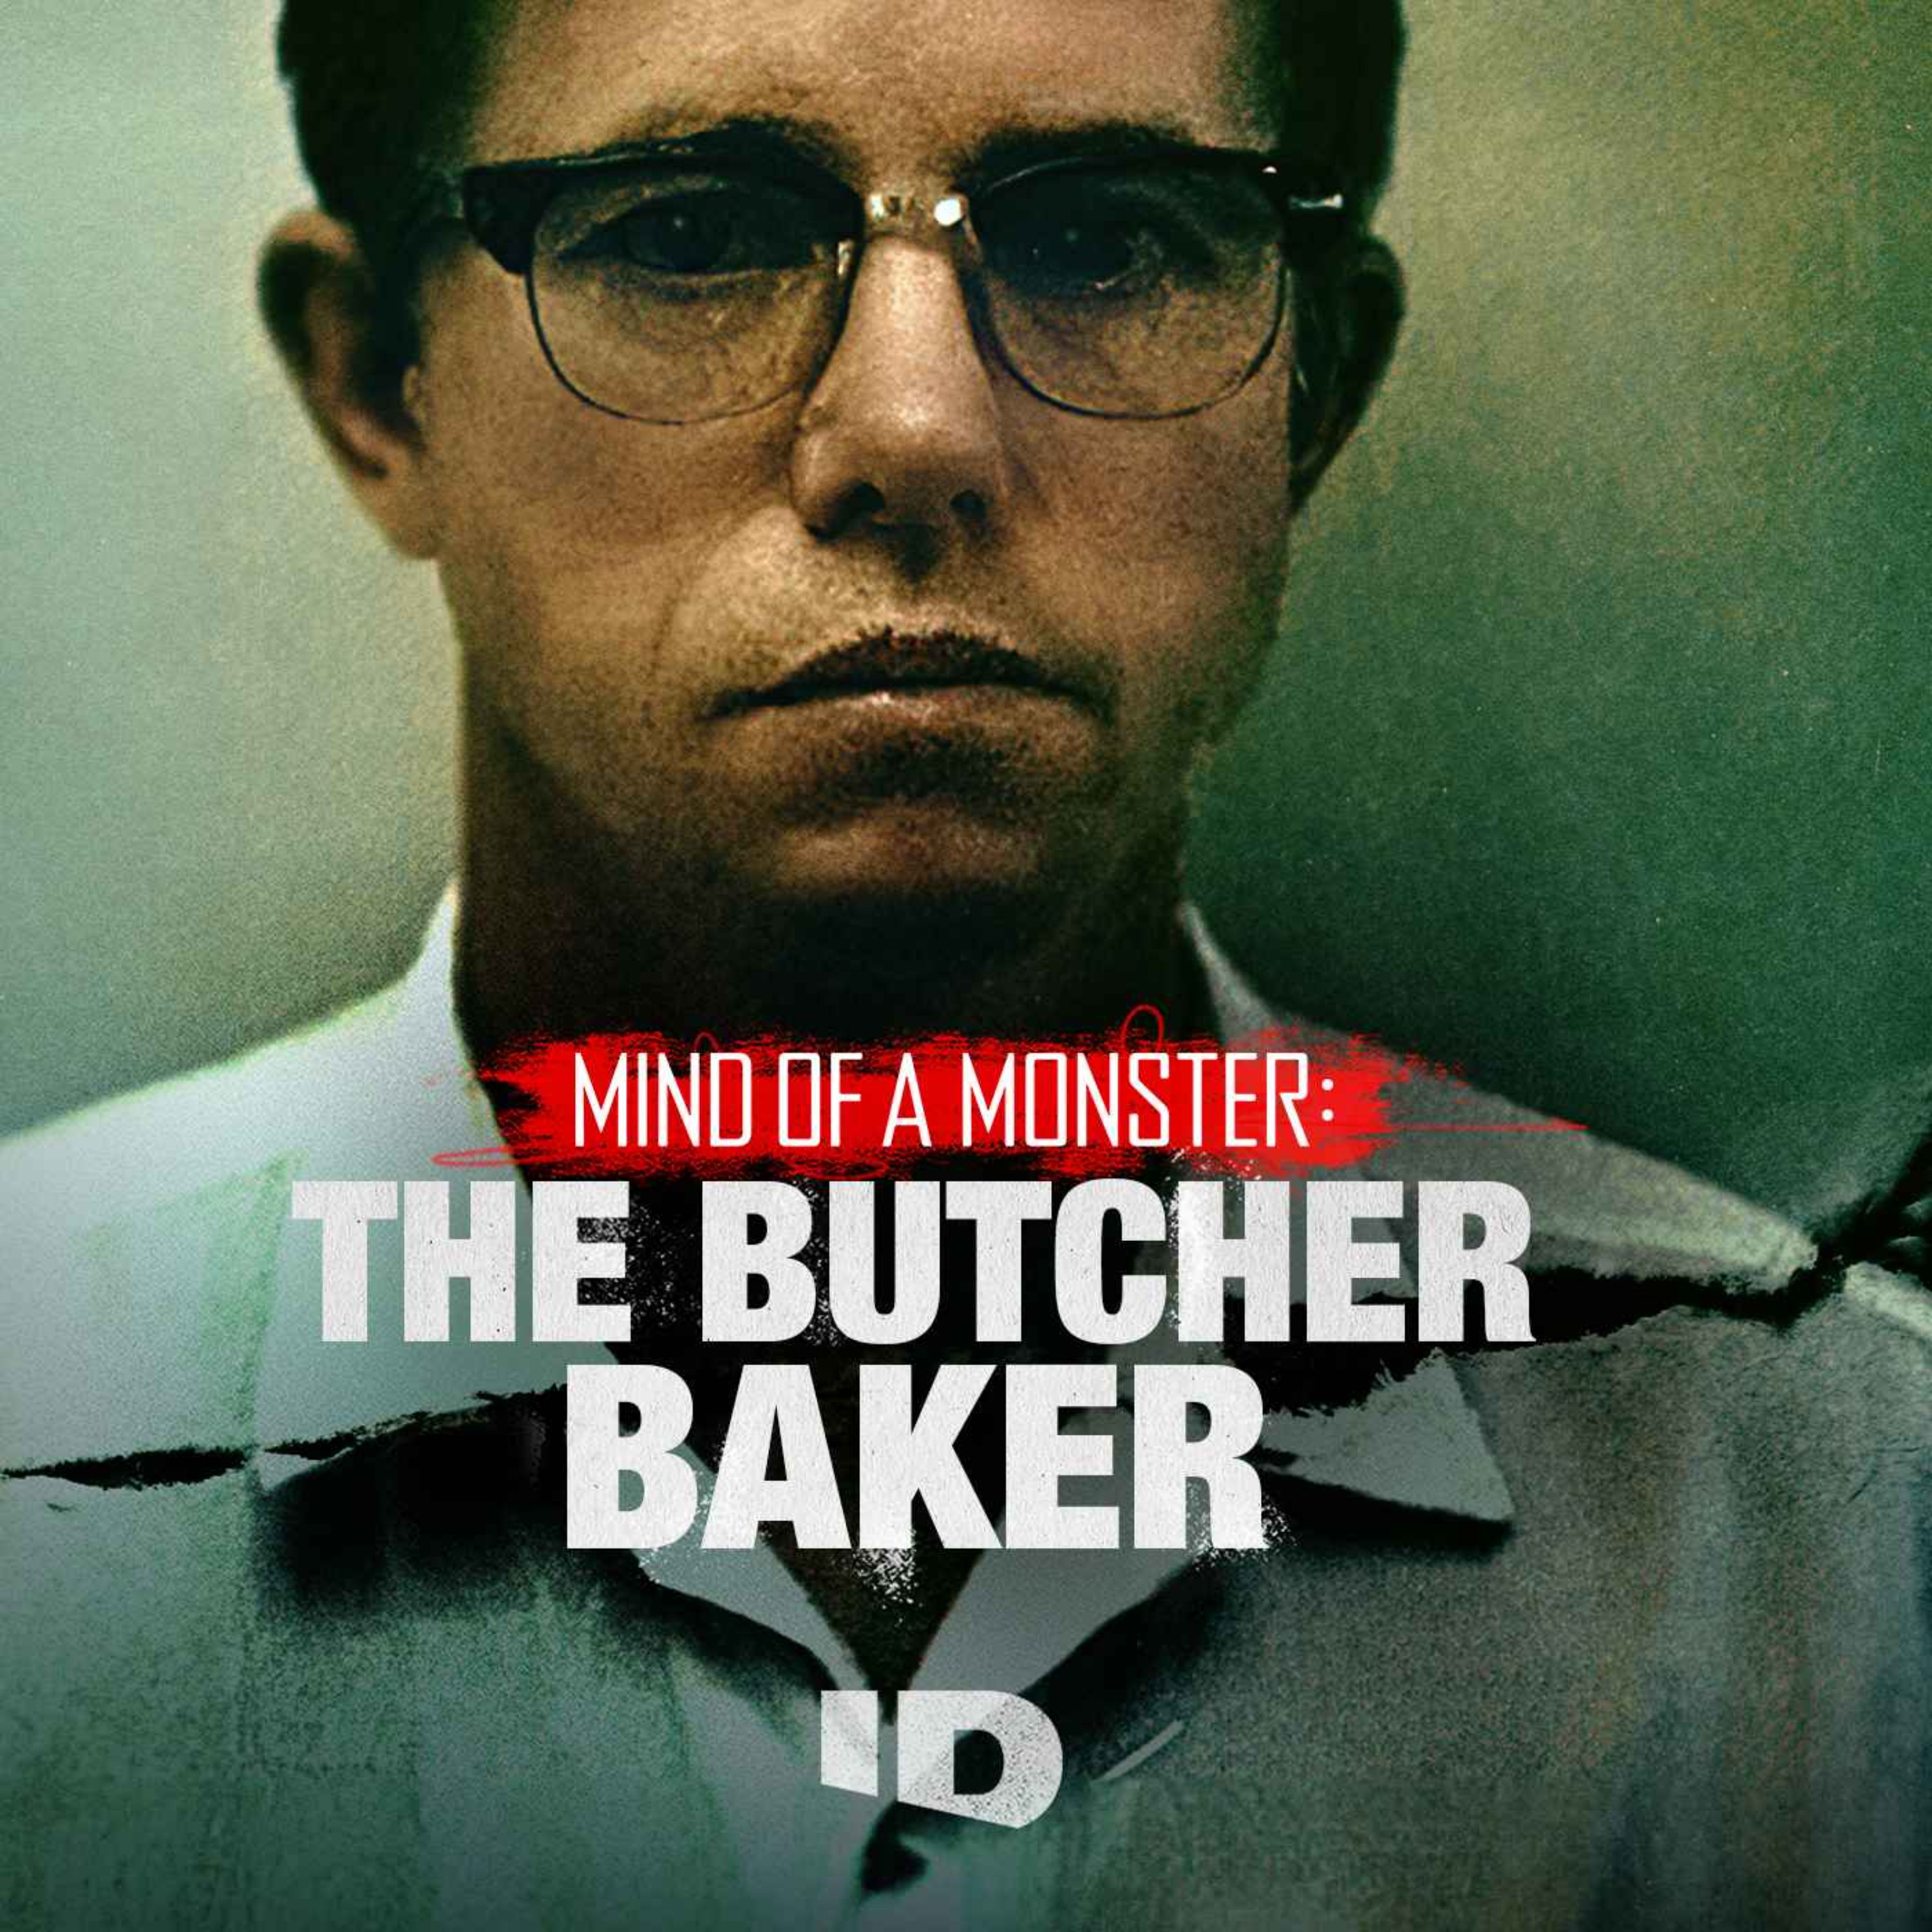 Introducing Mind of a Monster: The Butcher Baker